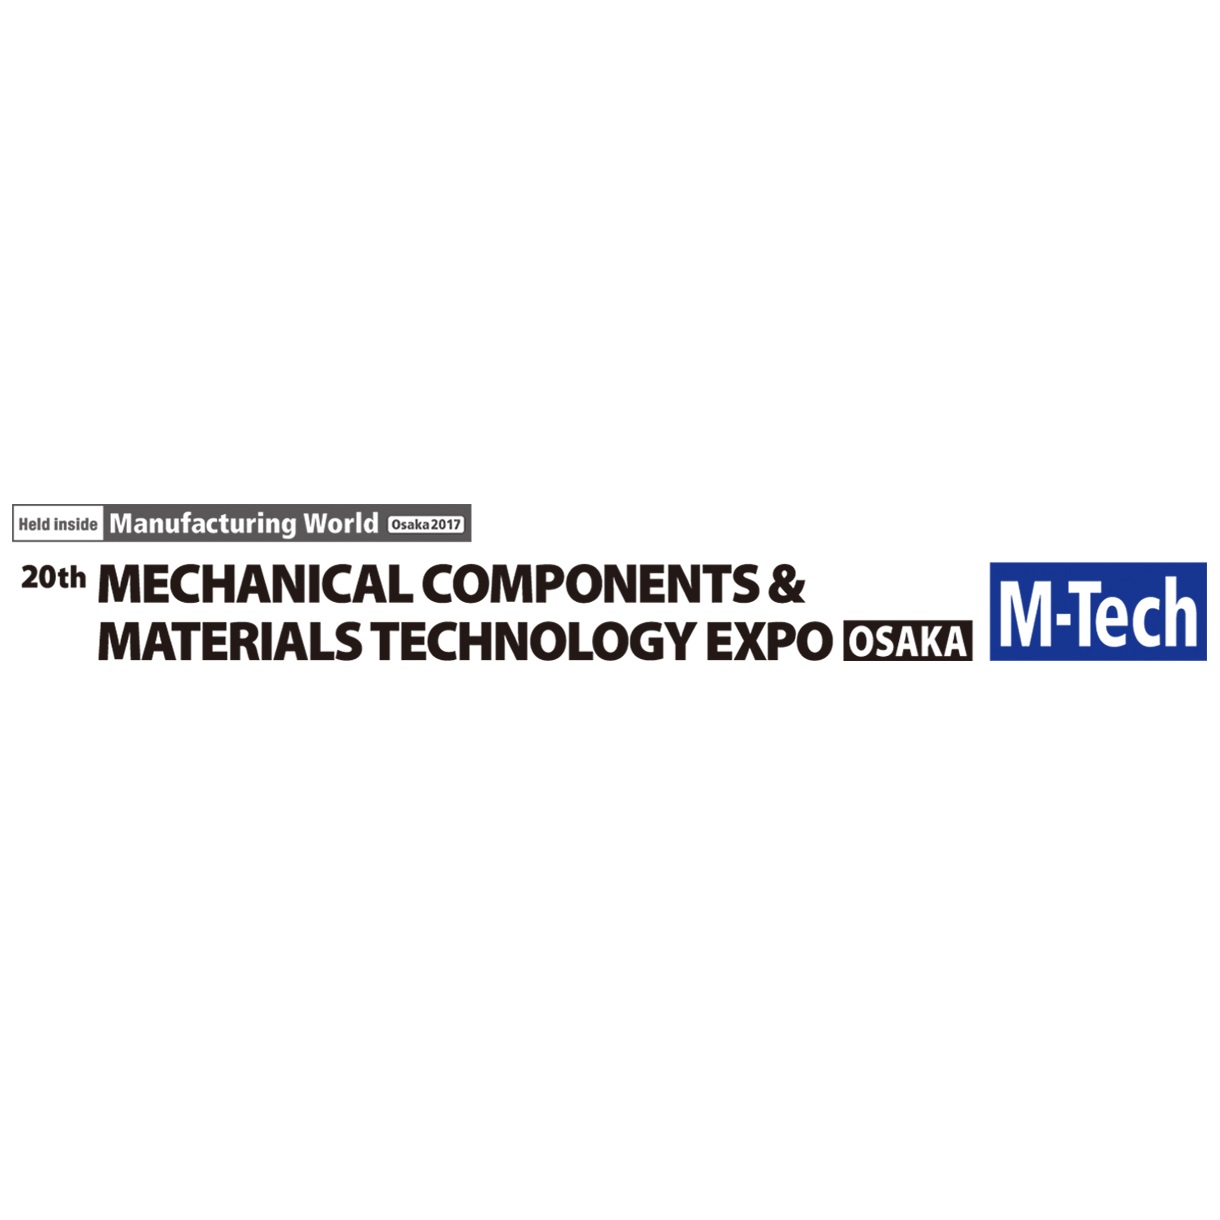 2017 Mechanical Components & Materials Technology Expo (M-Tech)